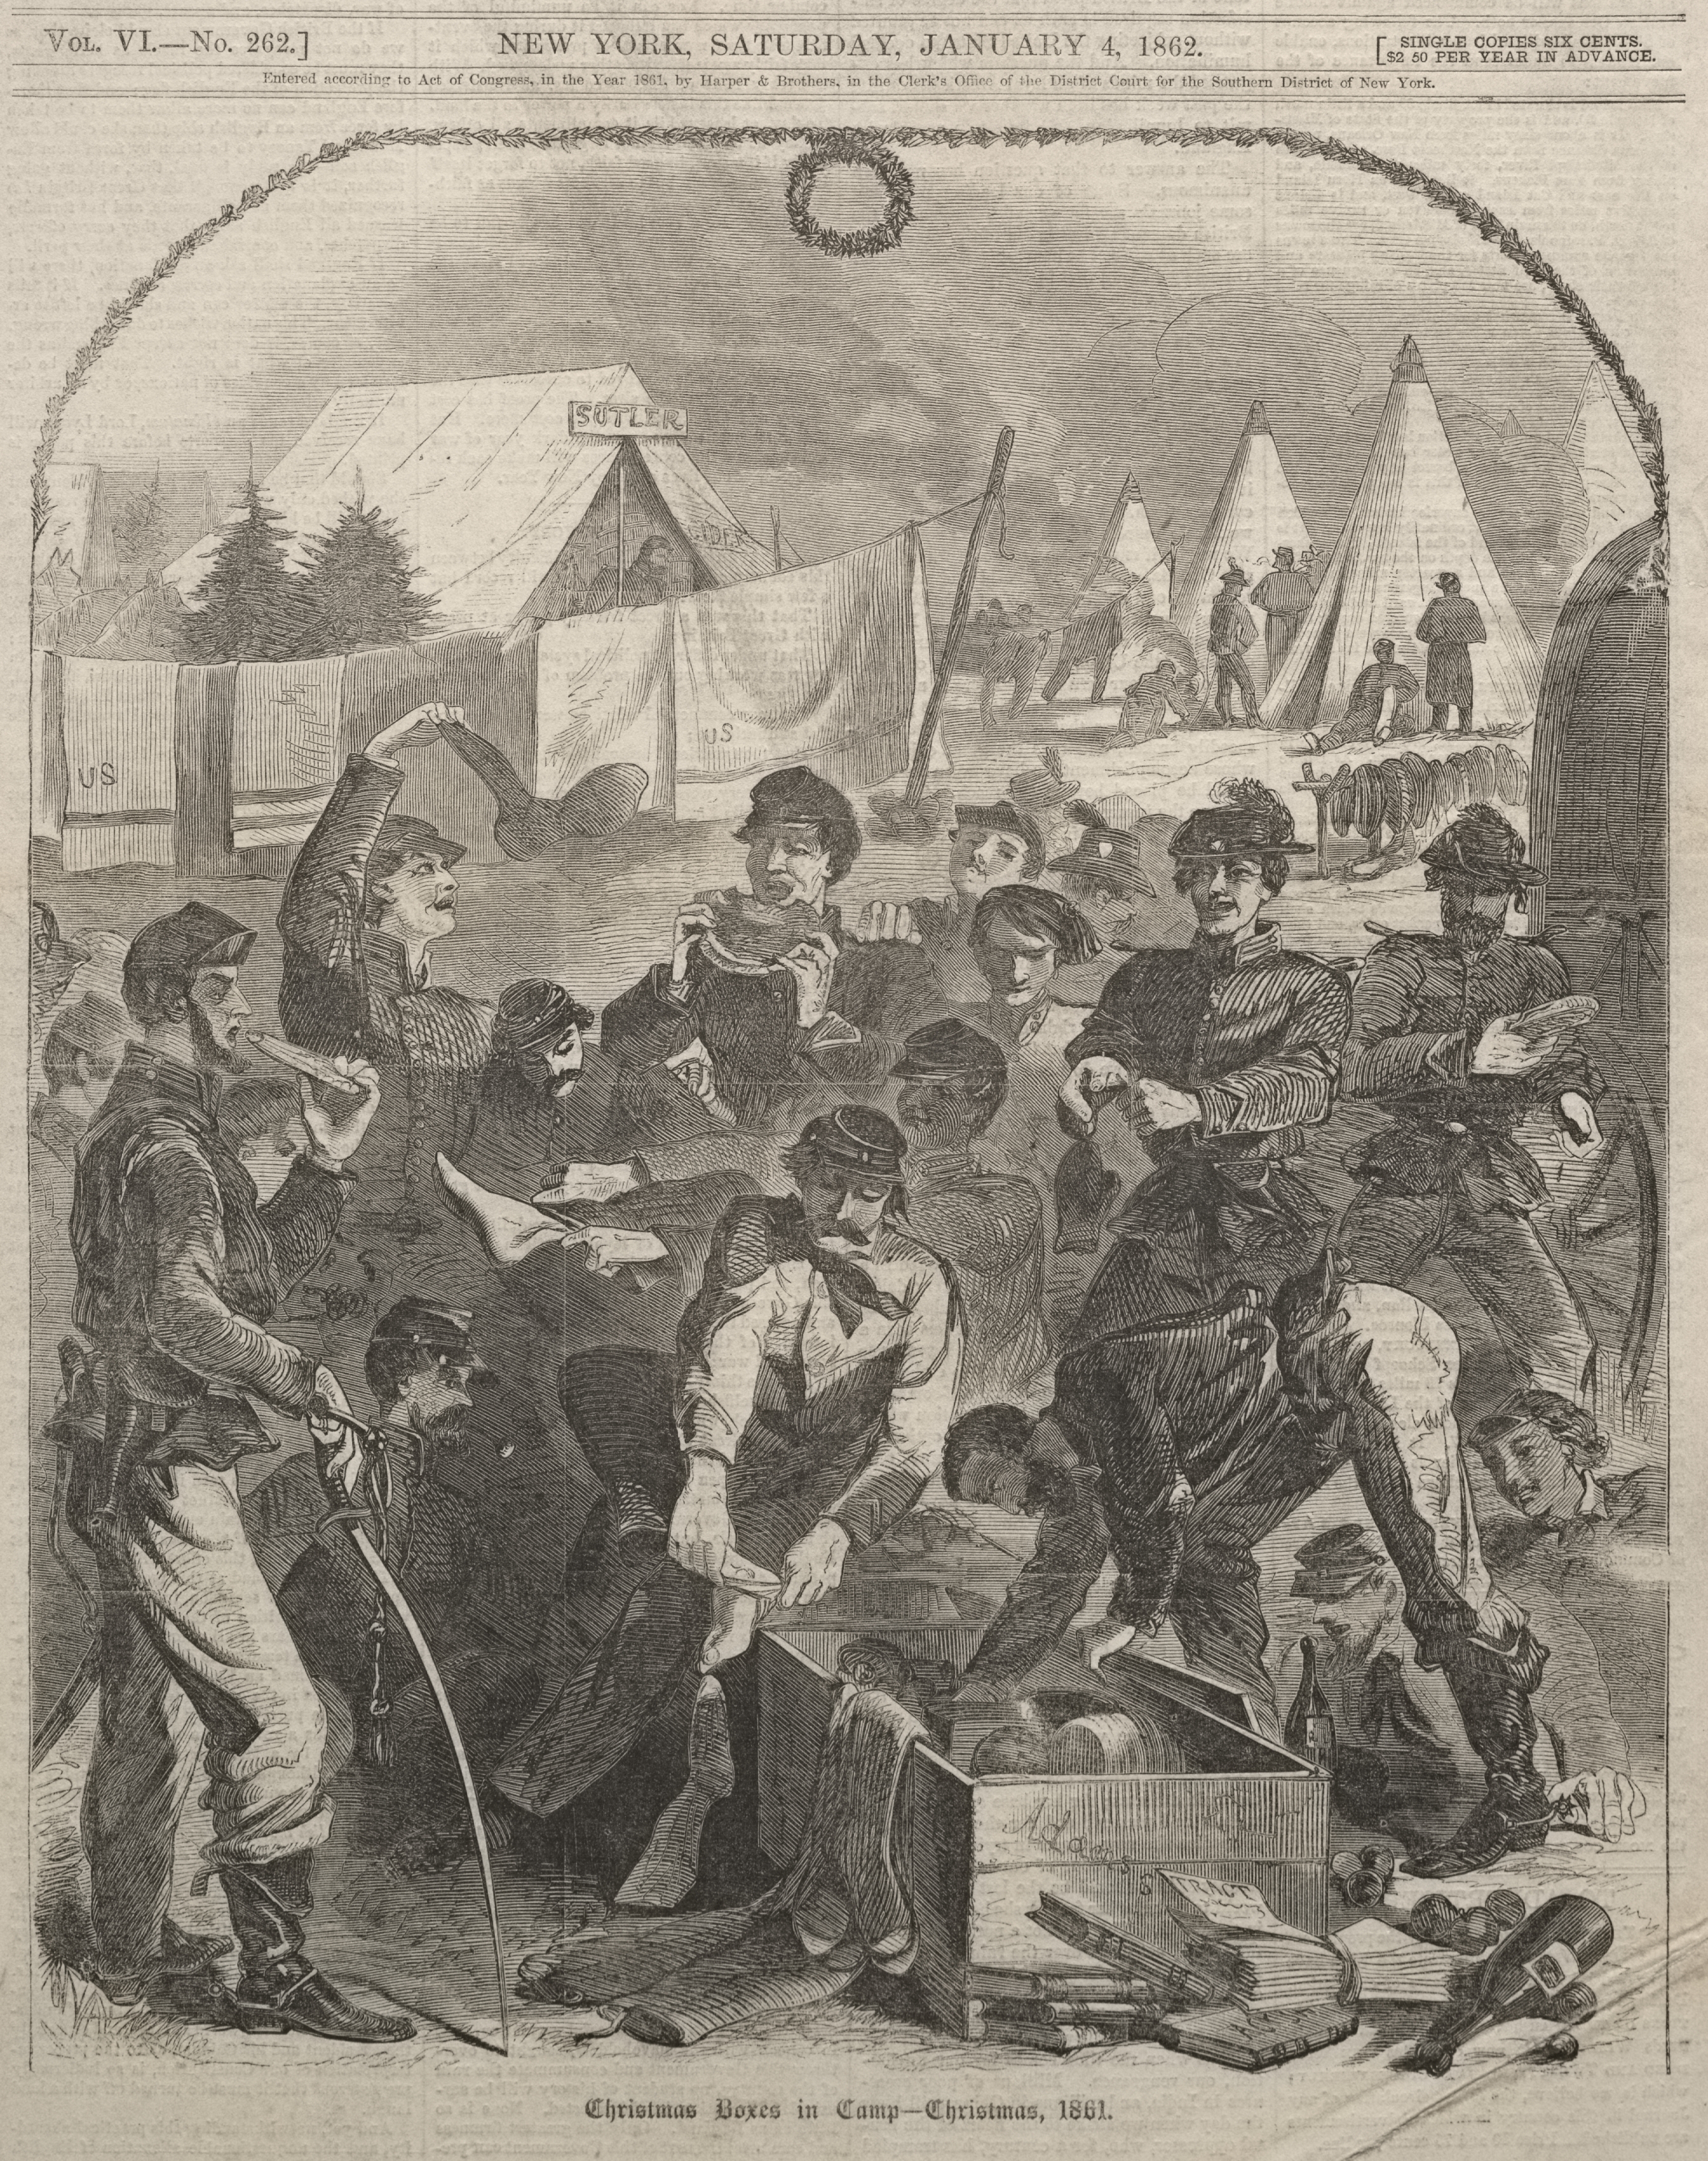 Christmas Boxes in Camp - Christmas, 1861